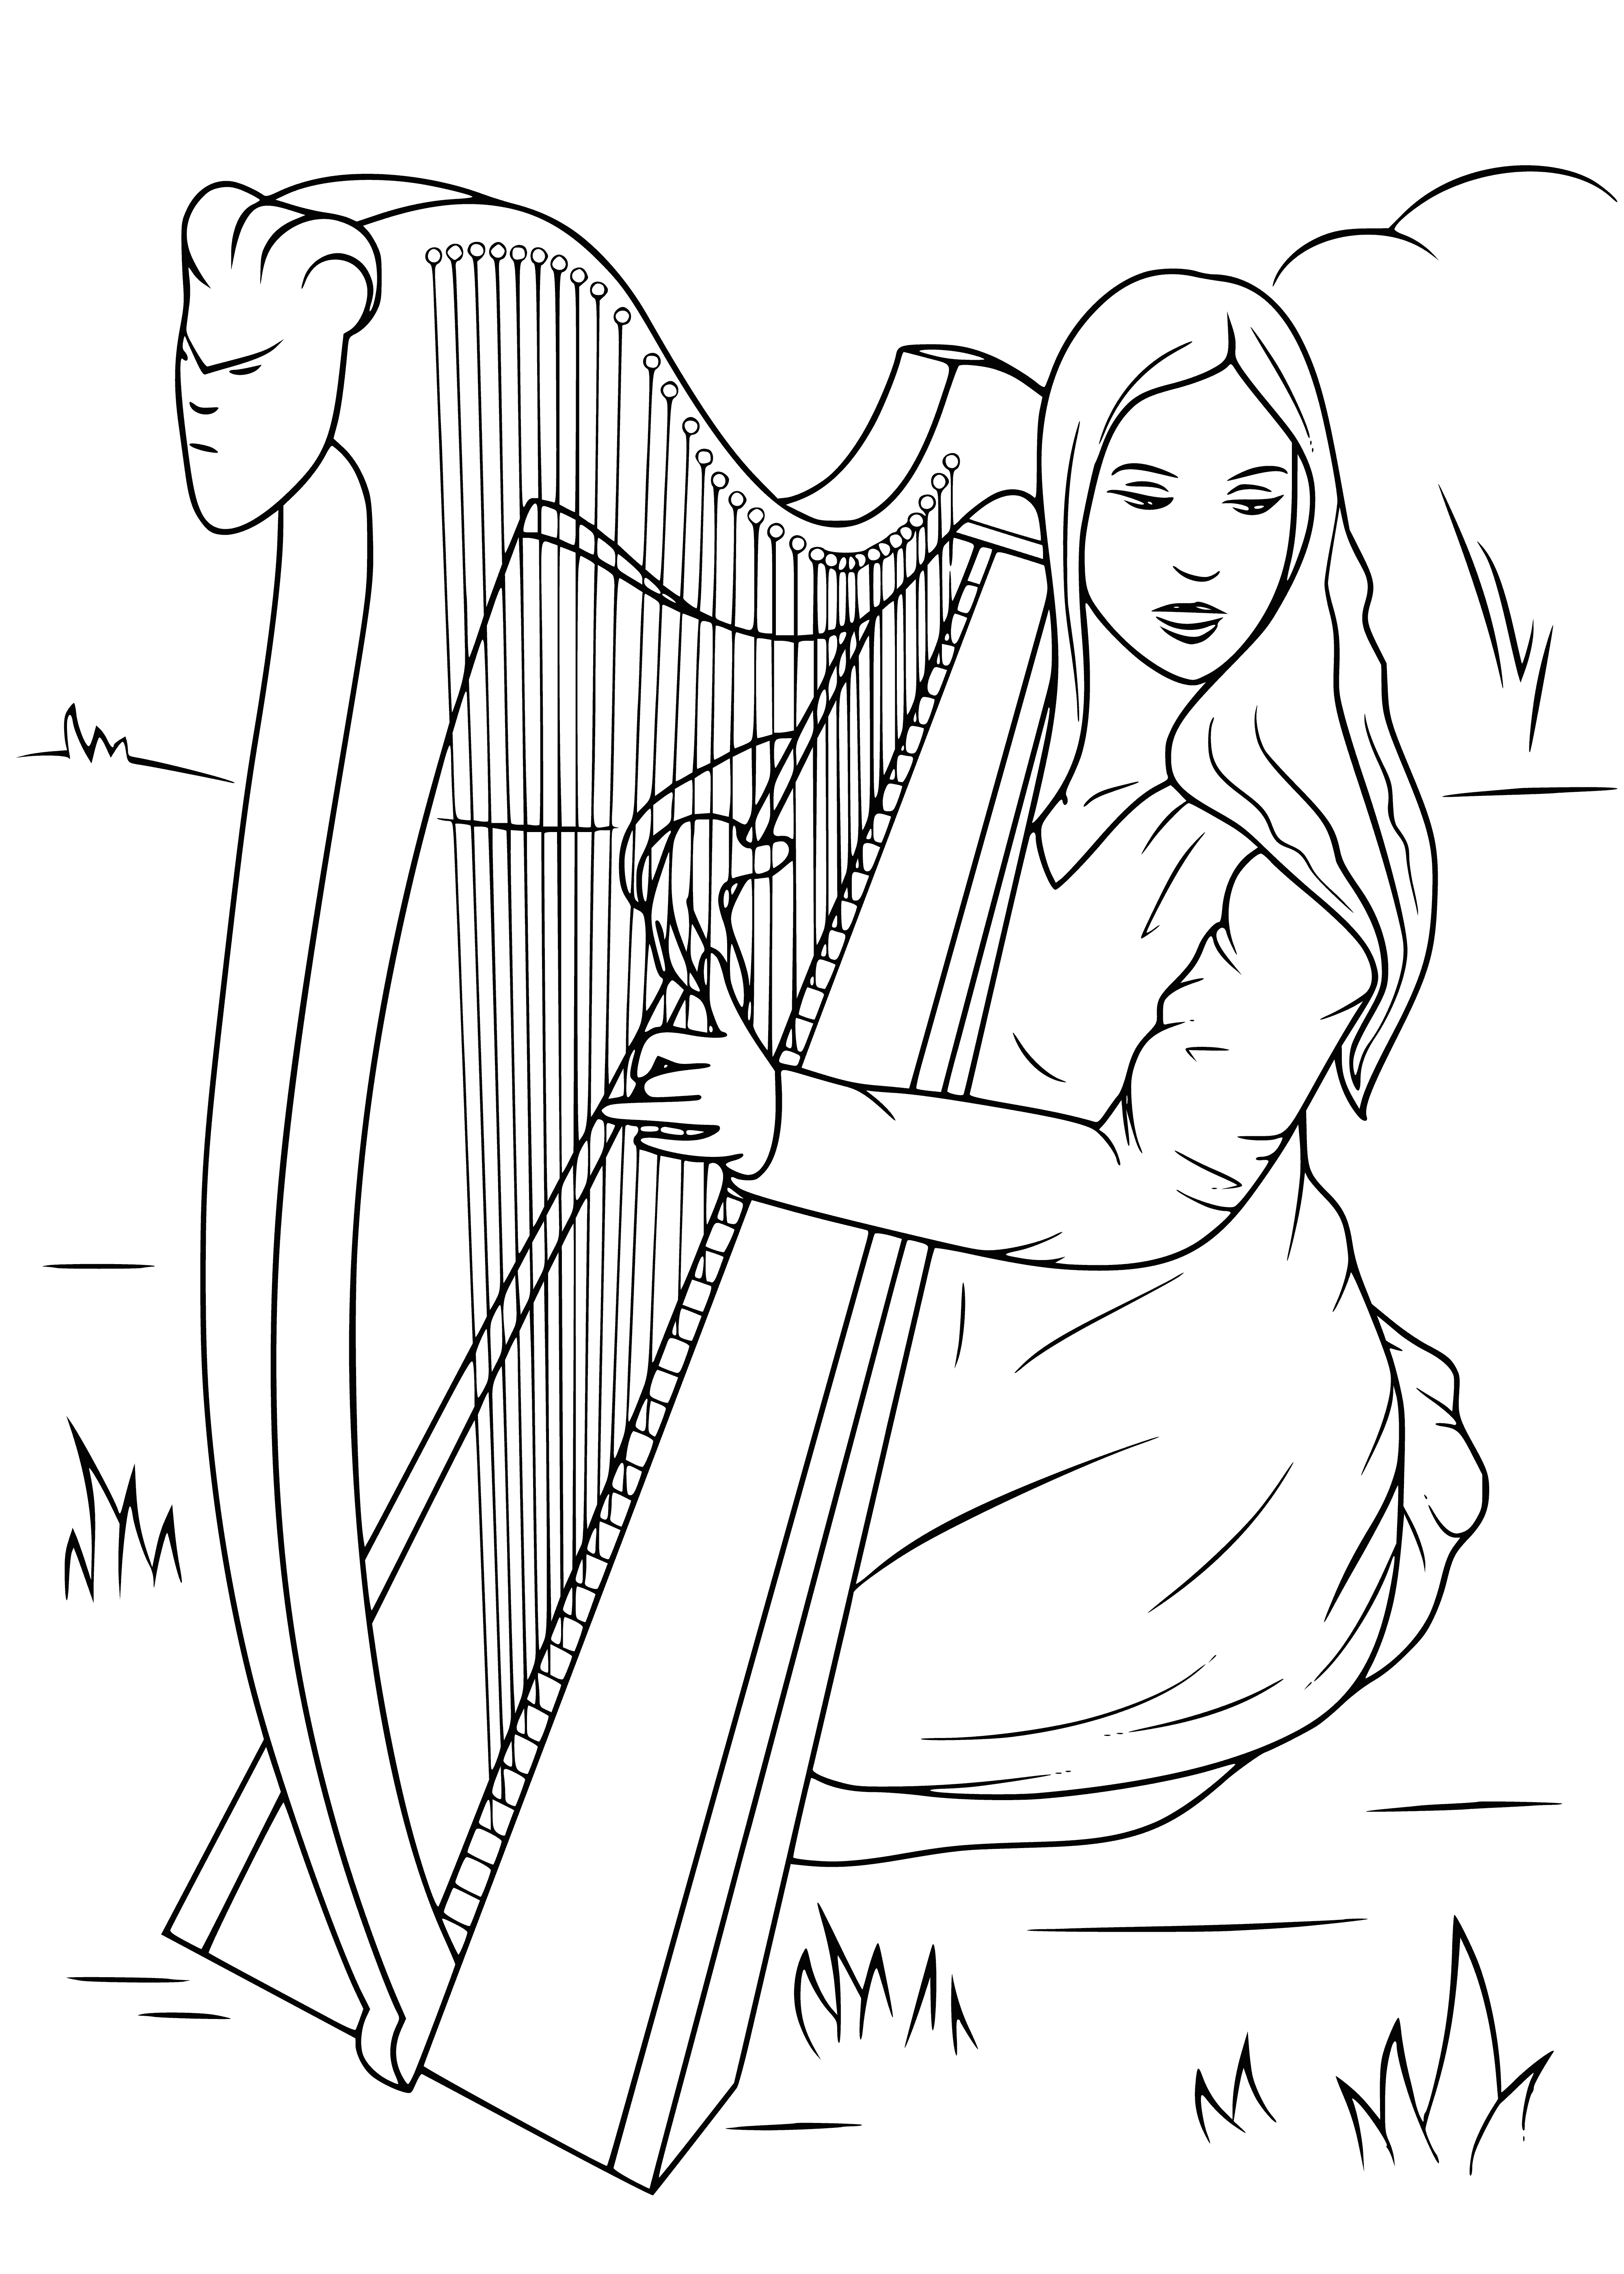 coloring page: A girl plays a harp with eyes closed, a peaceful expression, wearing a white dress and blue sash, her long curly hair cascading over her shoulders.